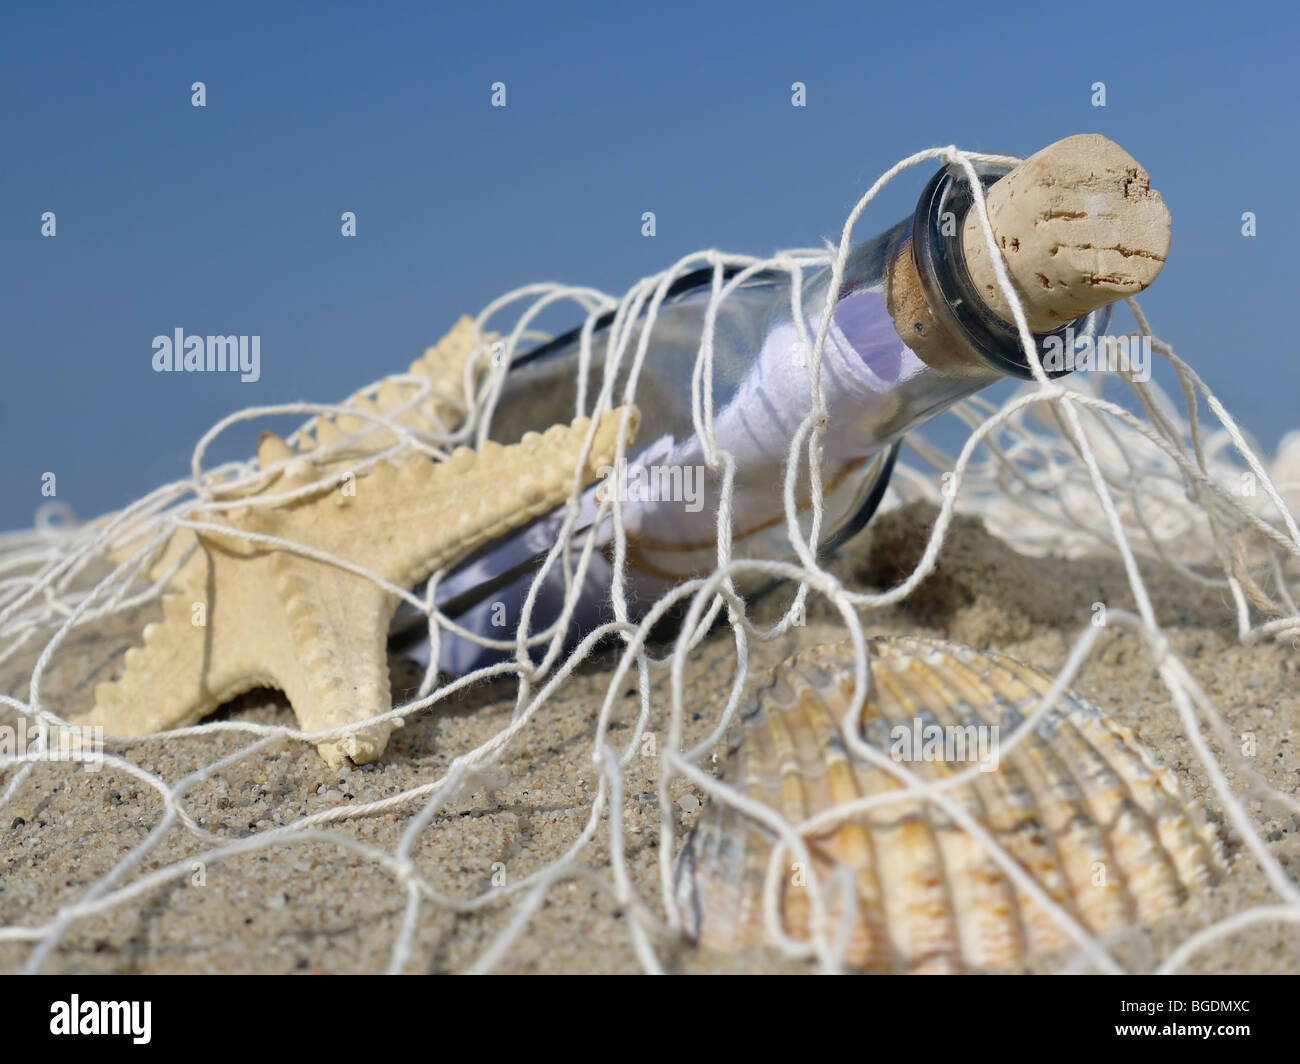 Starfish, seashell and bottle with message caught in the fishing net Stock Photo